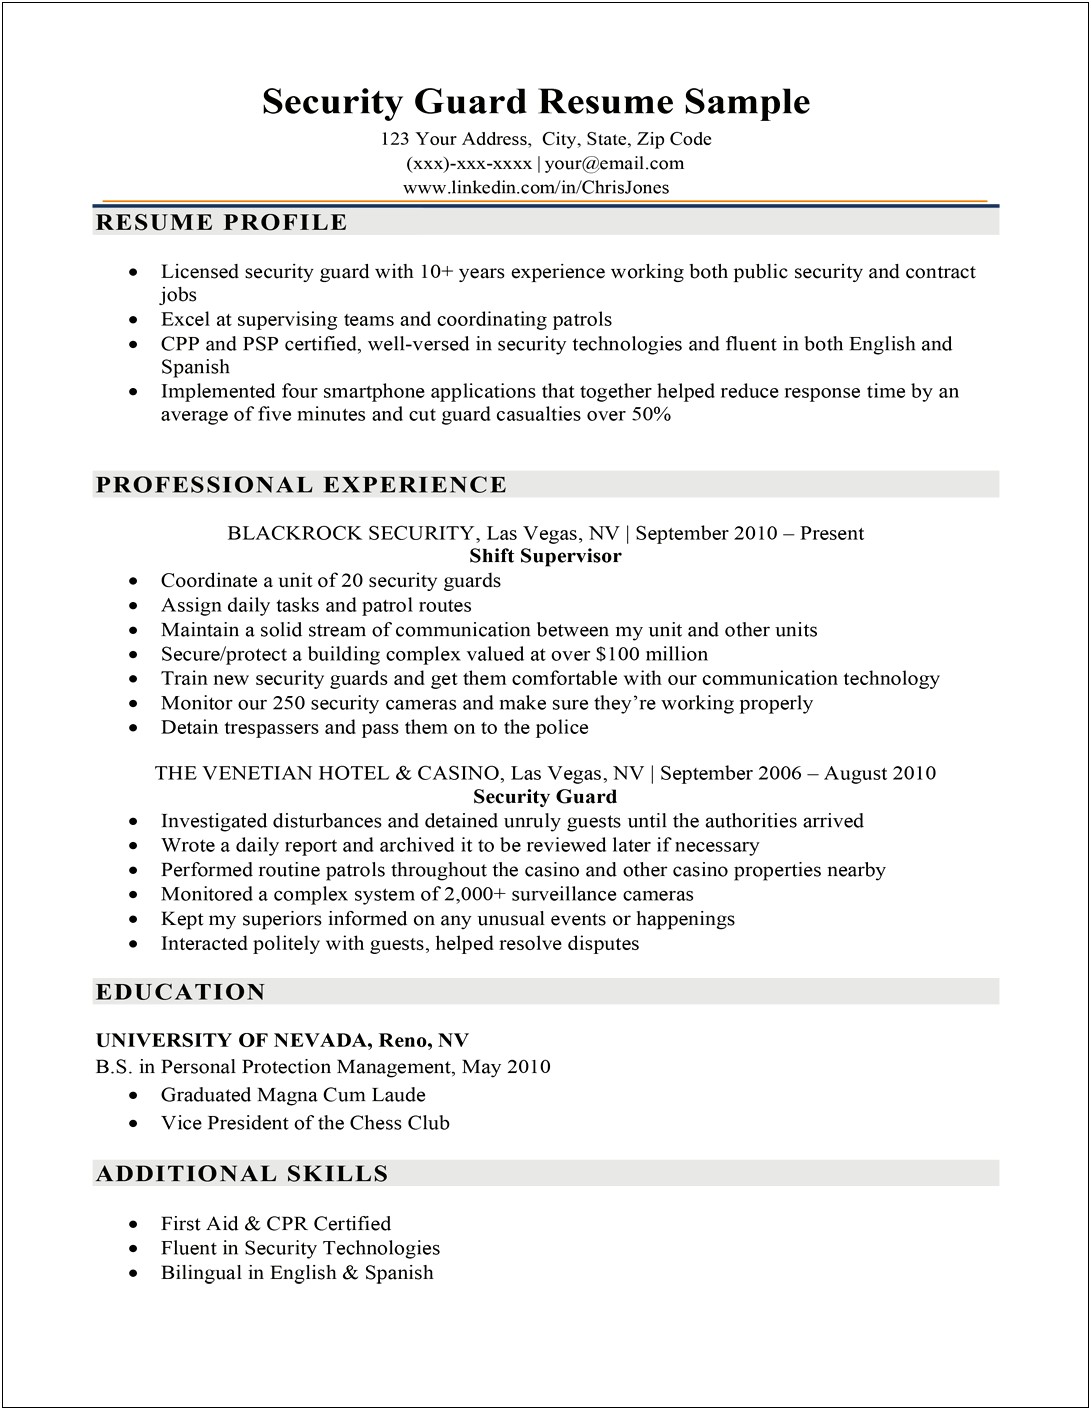 Financial Aid Officer Resume Sample